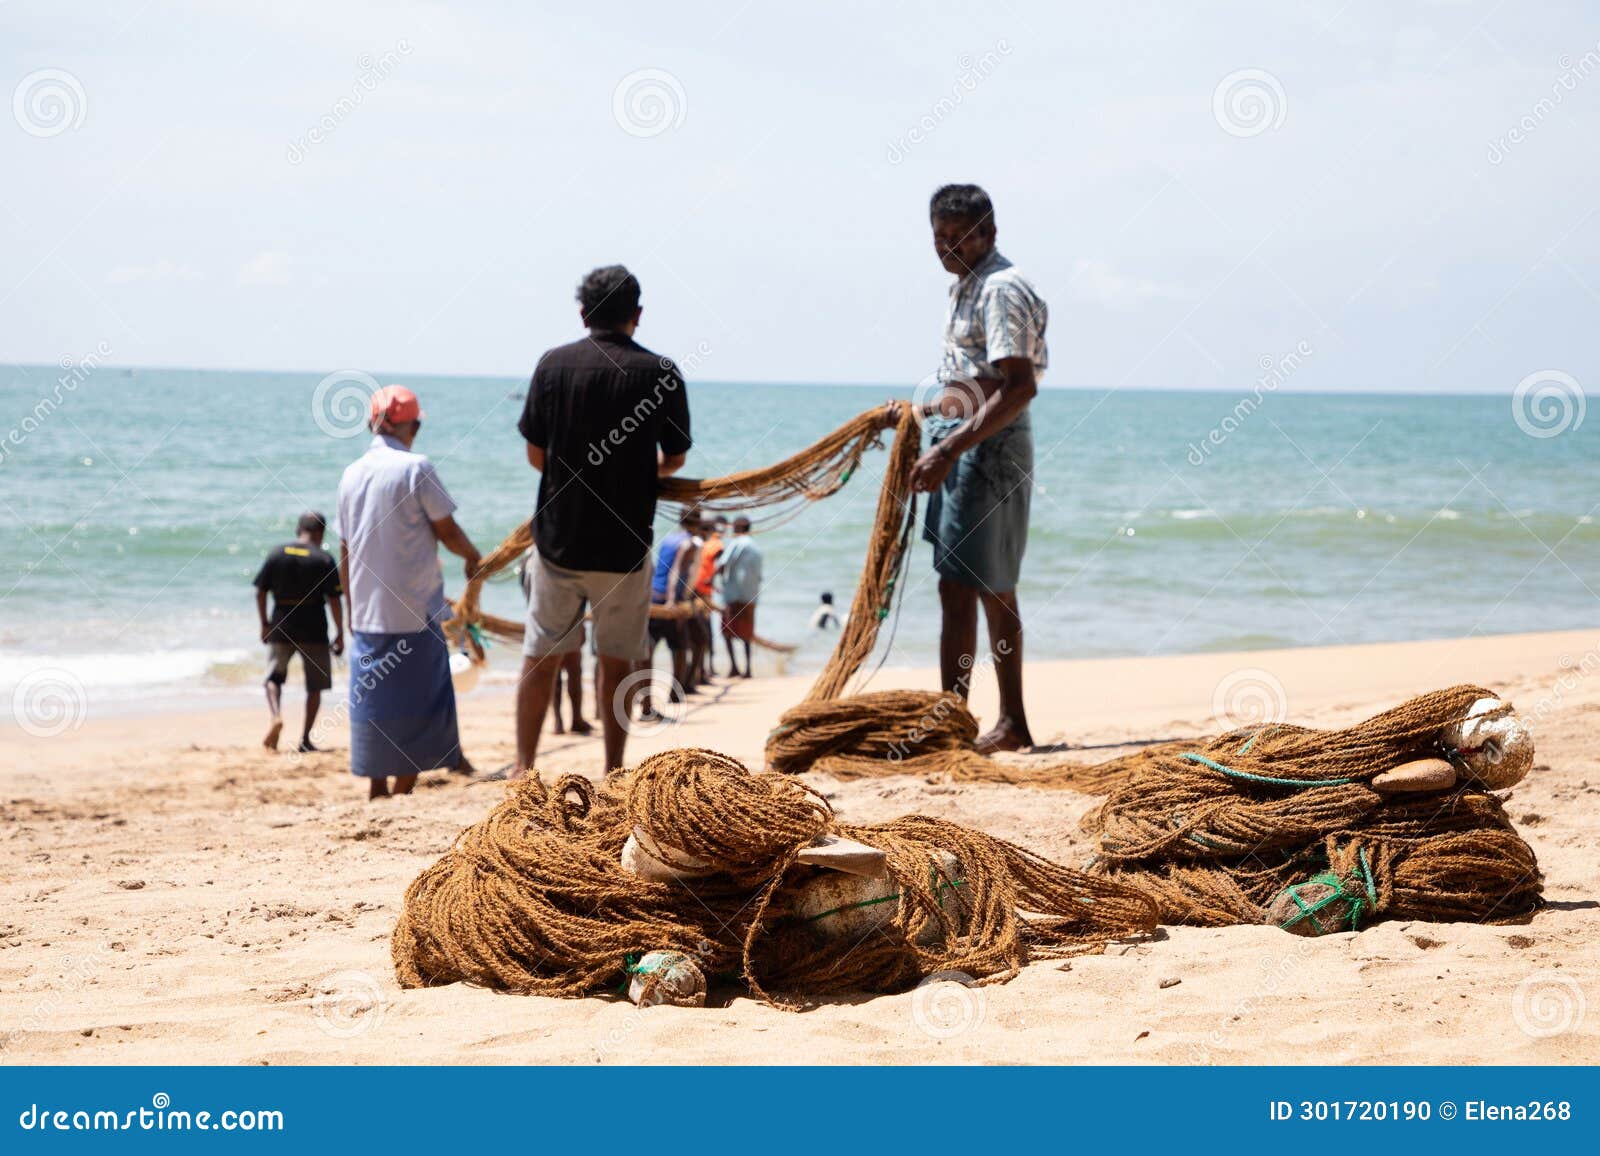 Fishermen Pull Over Large Fishing Net Editorial Image - Image of combined,  culture: 301720190